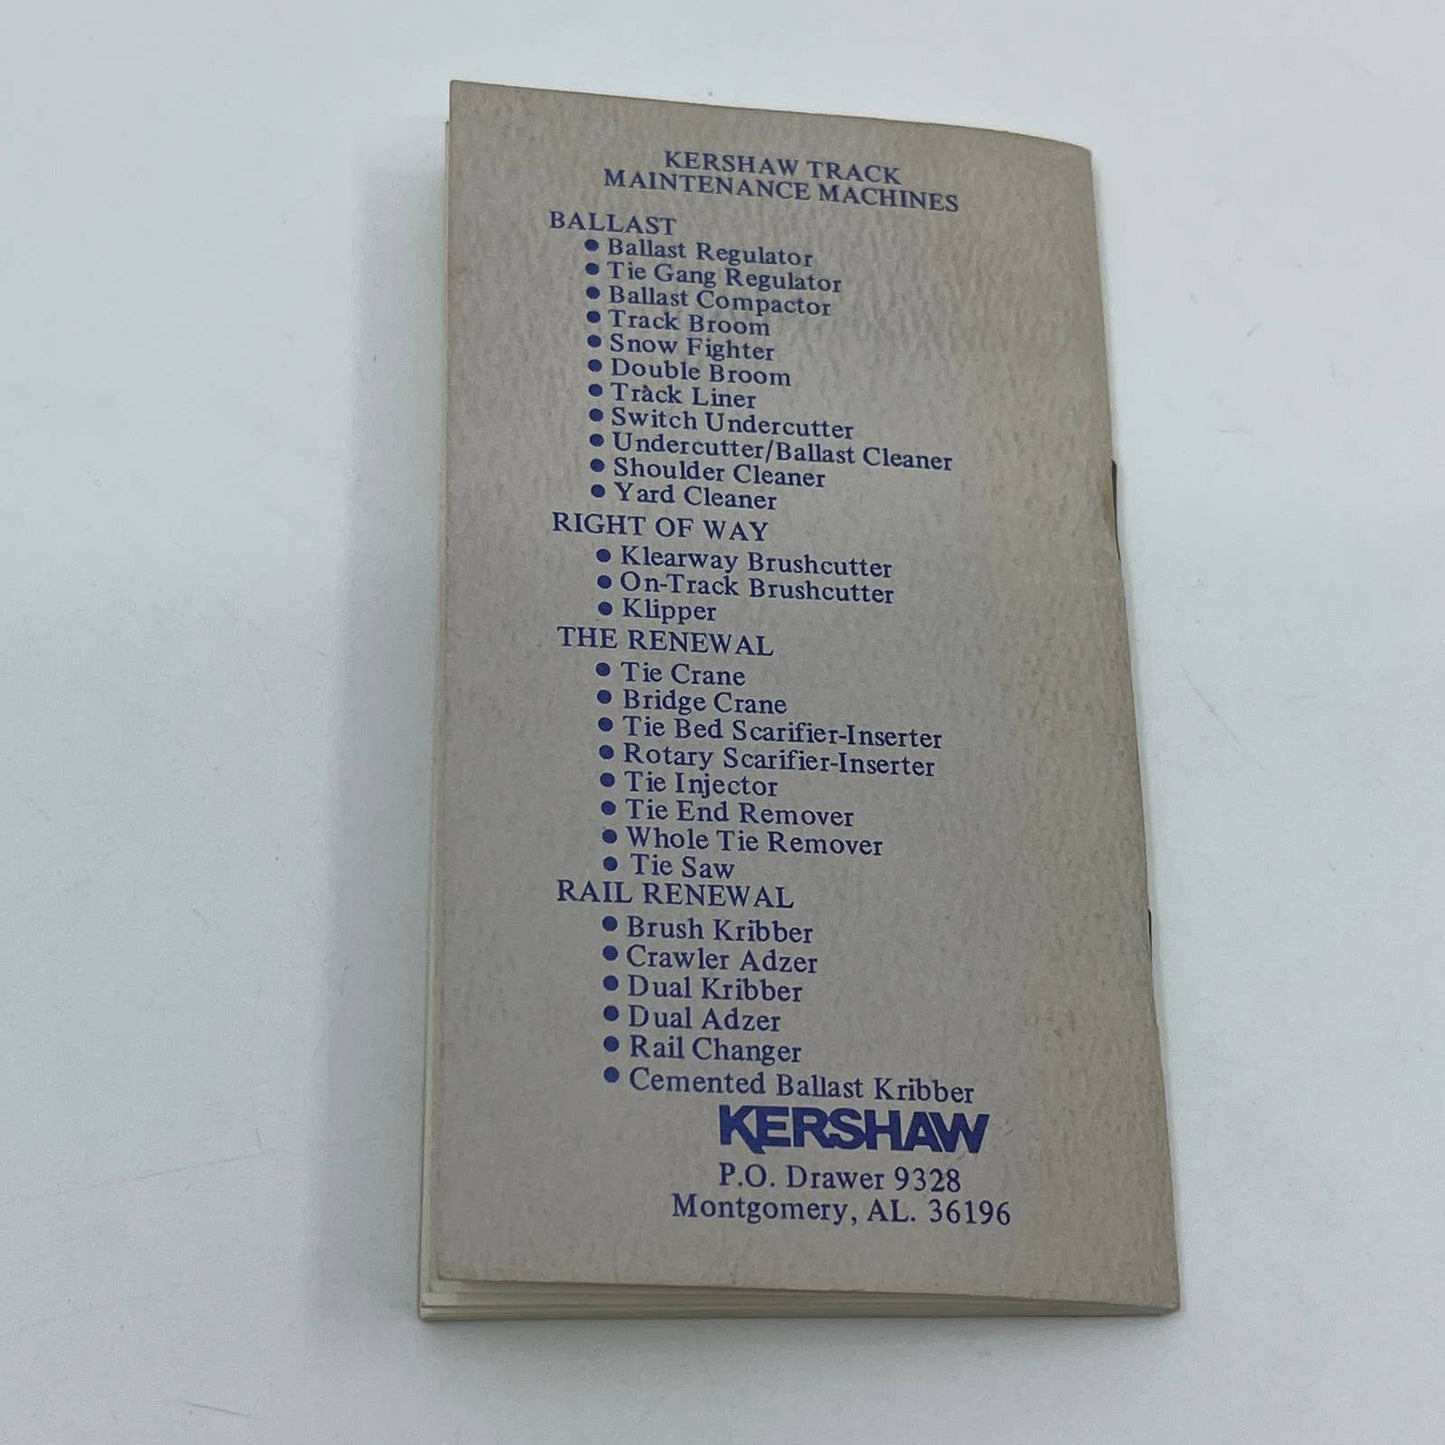 1982 Kershaw Railroad Track Maintenance Machines FRA Safety Standards Book TG6